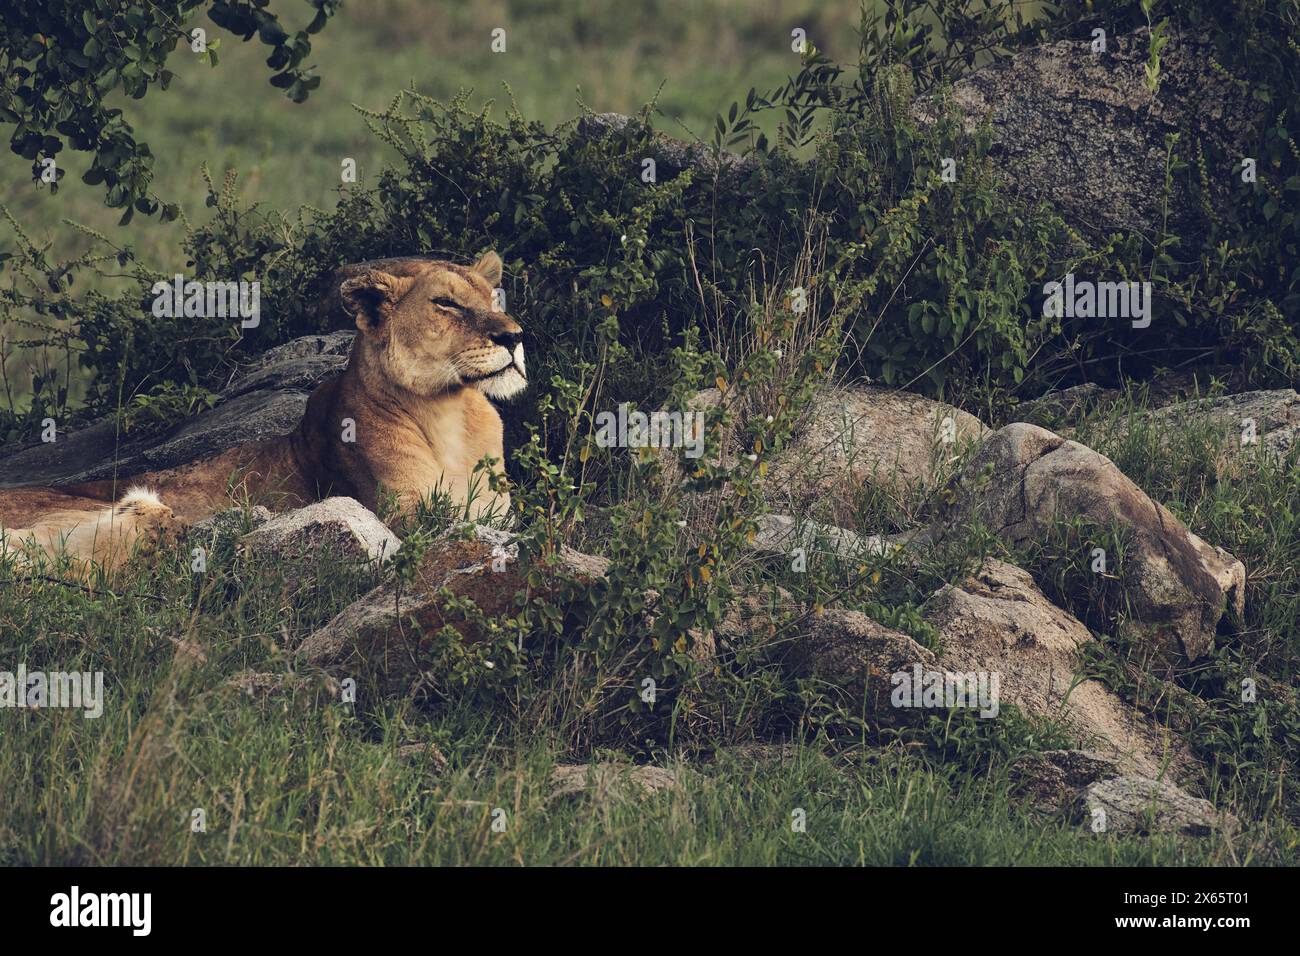 A lioness basks in the sunlight after waking from a nap. Stock Photo